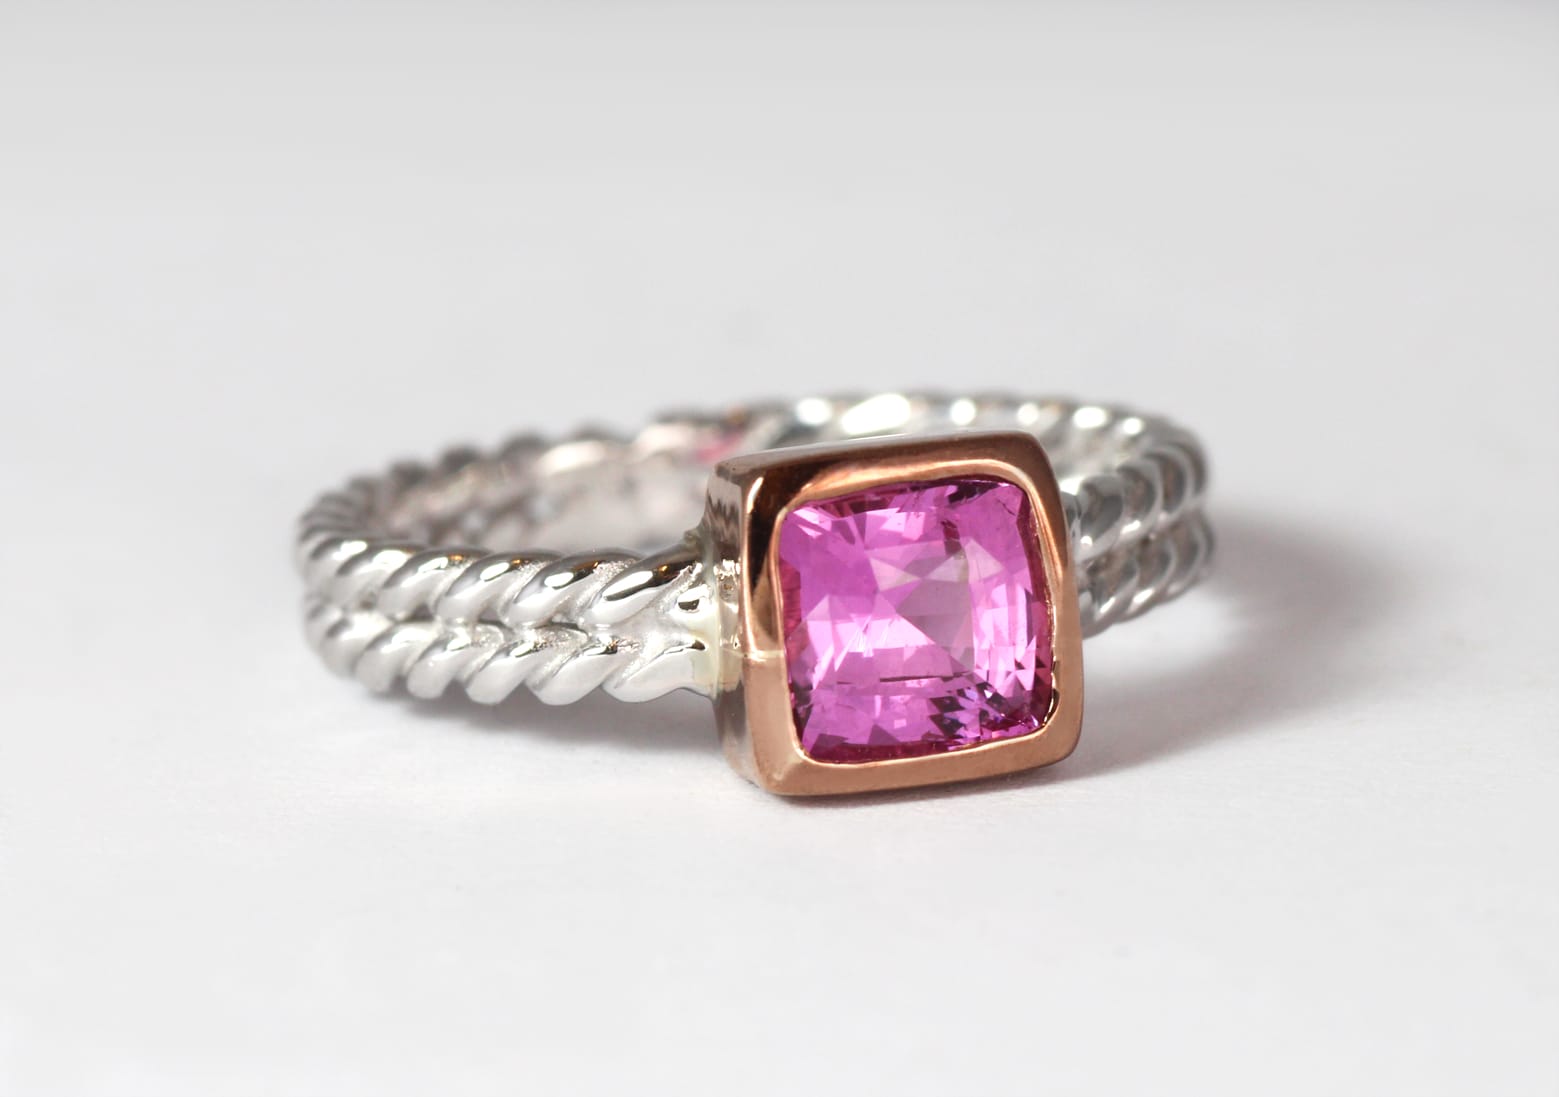 18ct Fairtrade gold with pink sapphire by Zoe Pook Jewellery